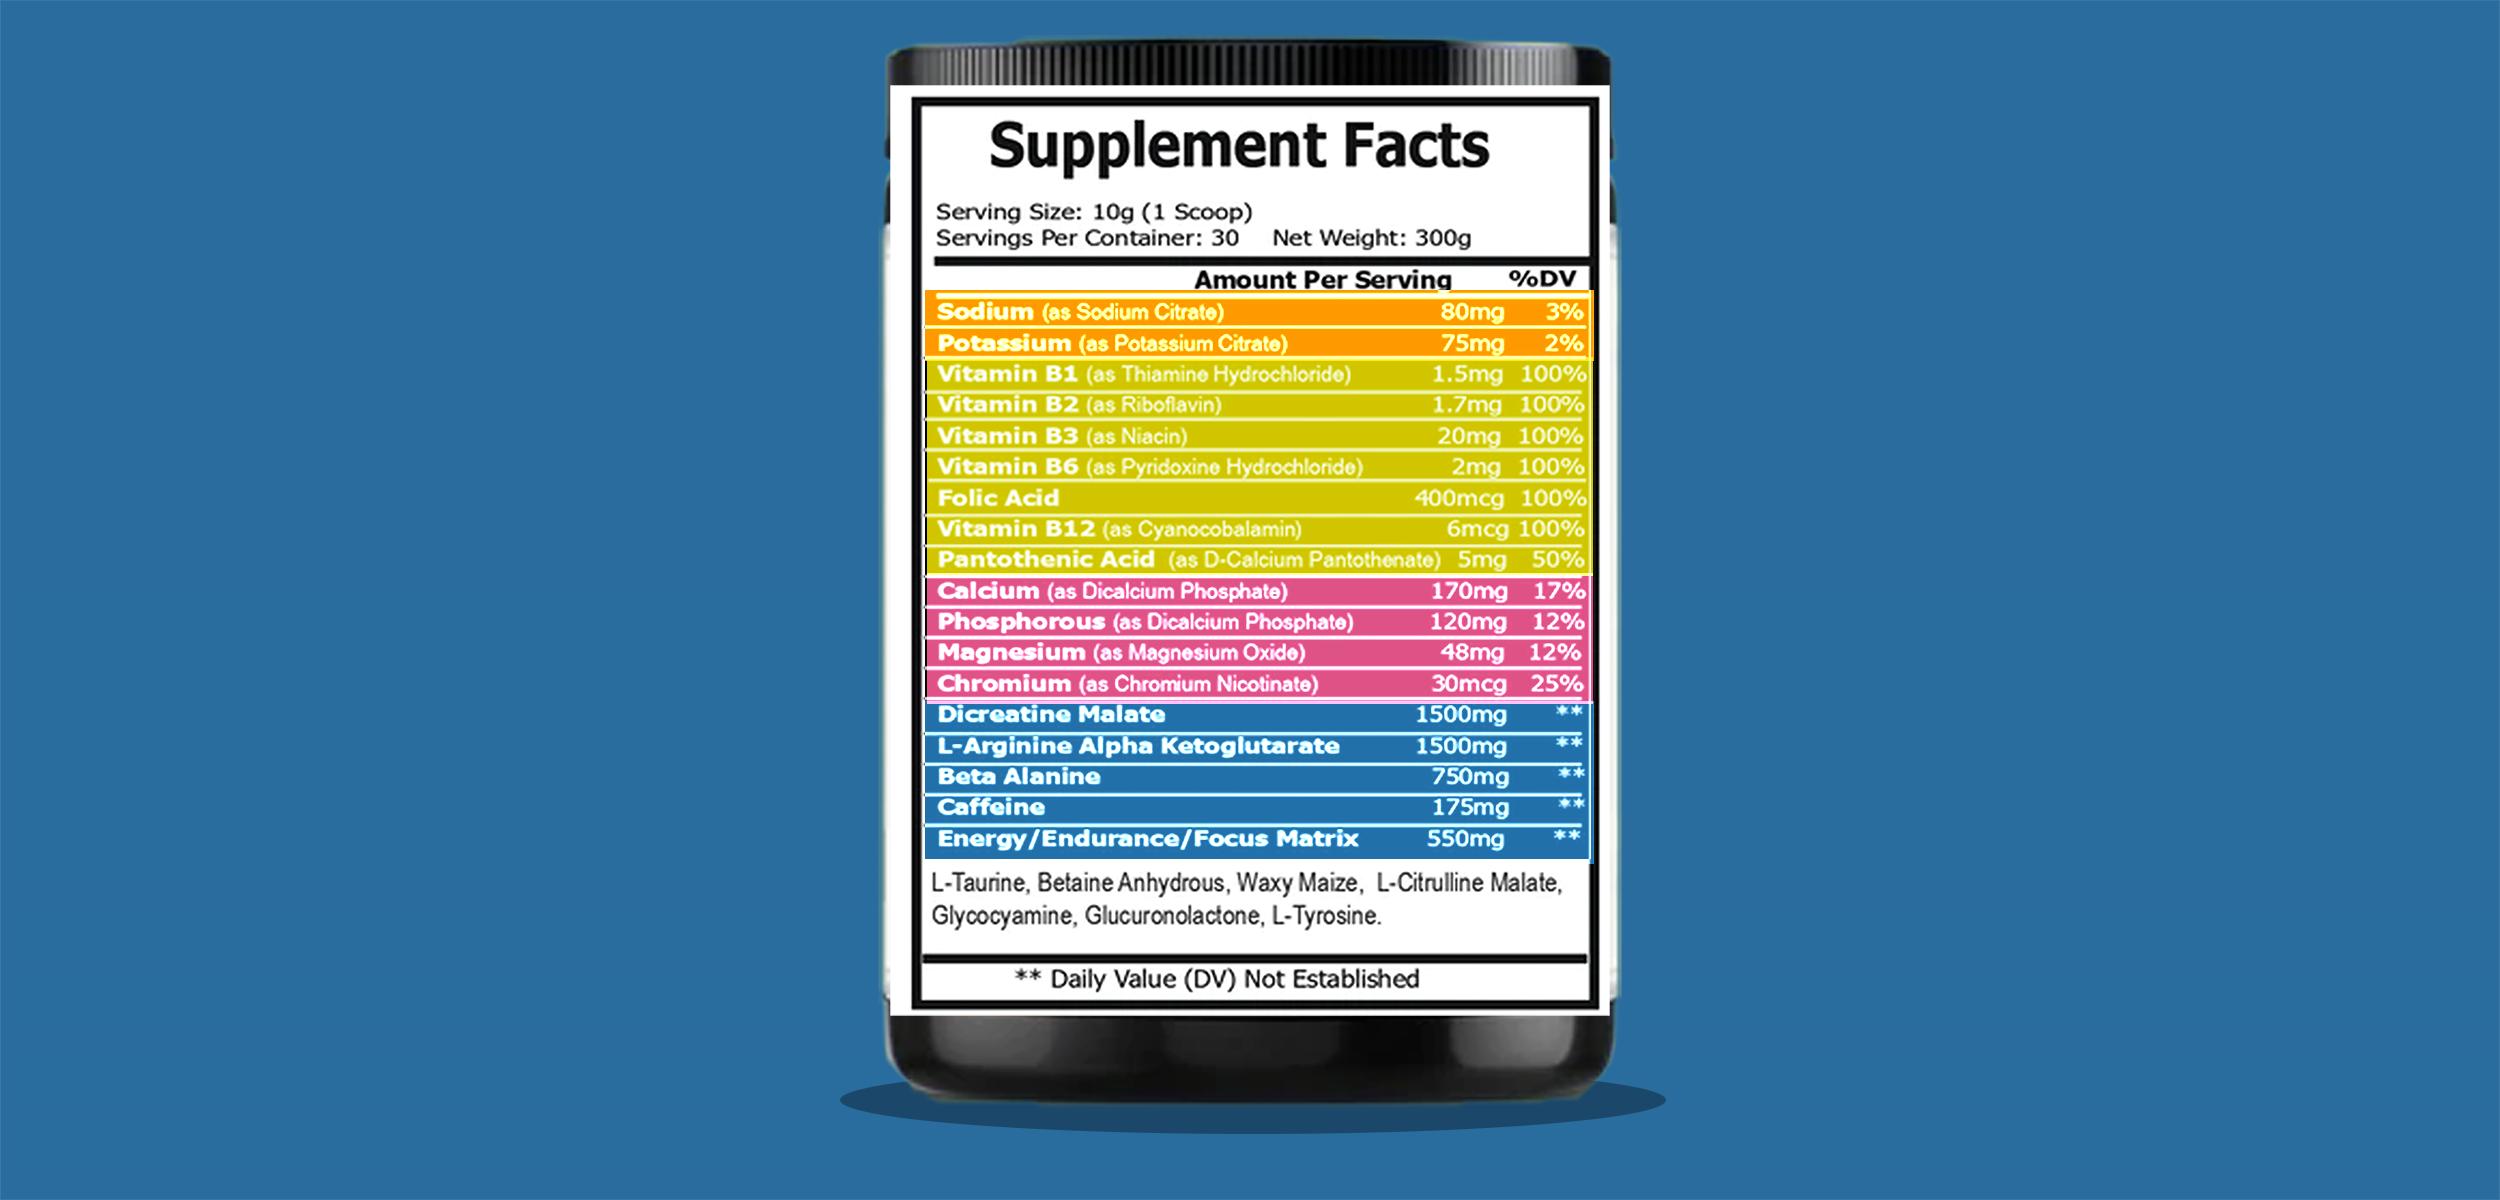 New Supplement Facts of preworkout powder